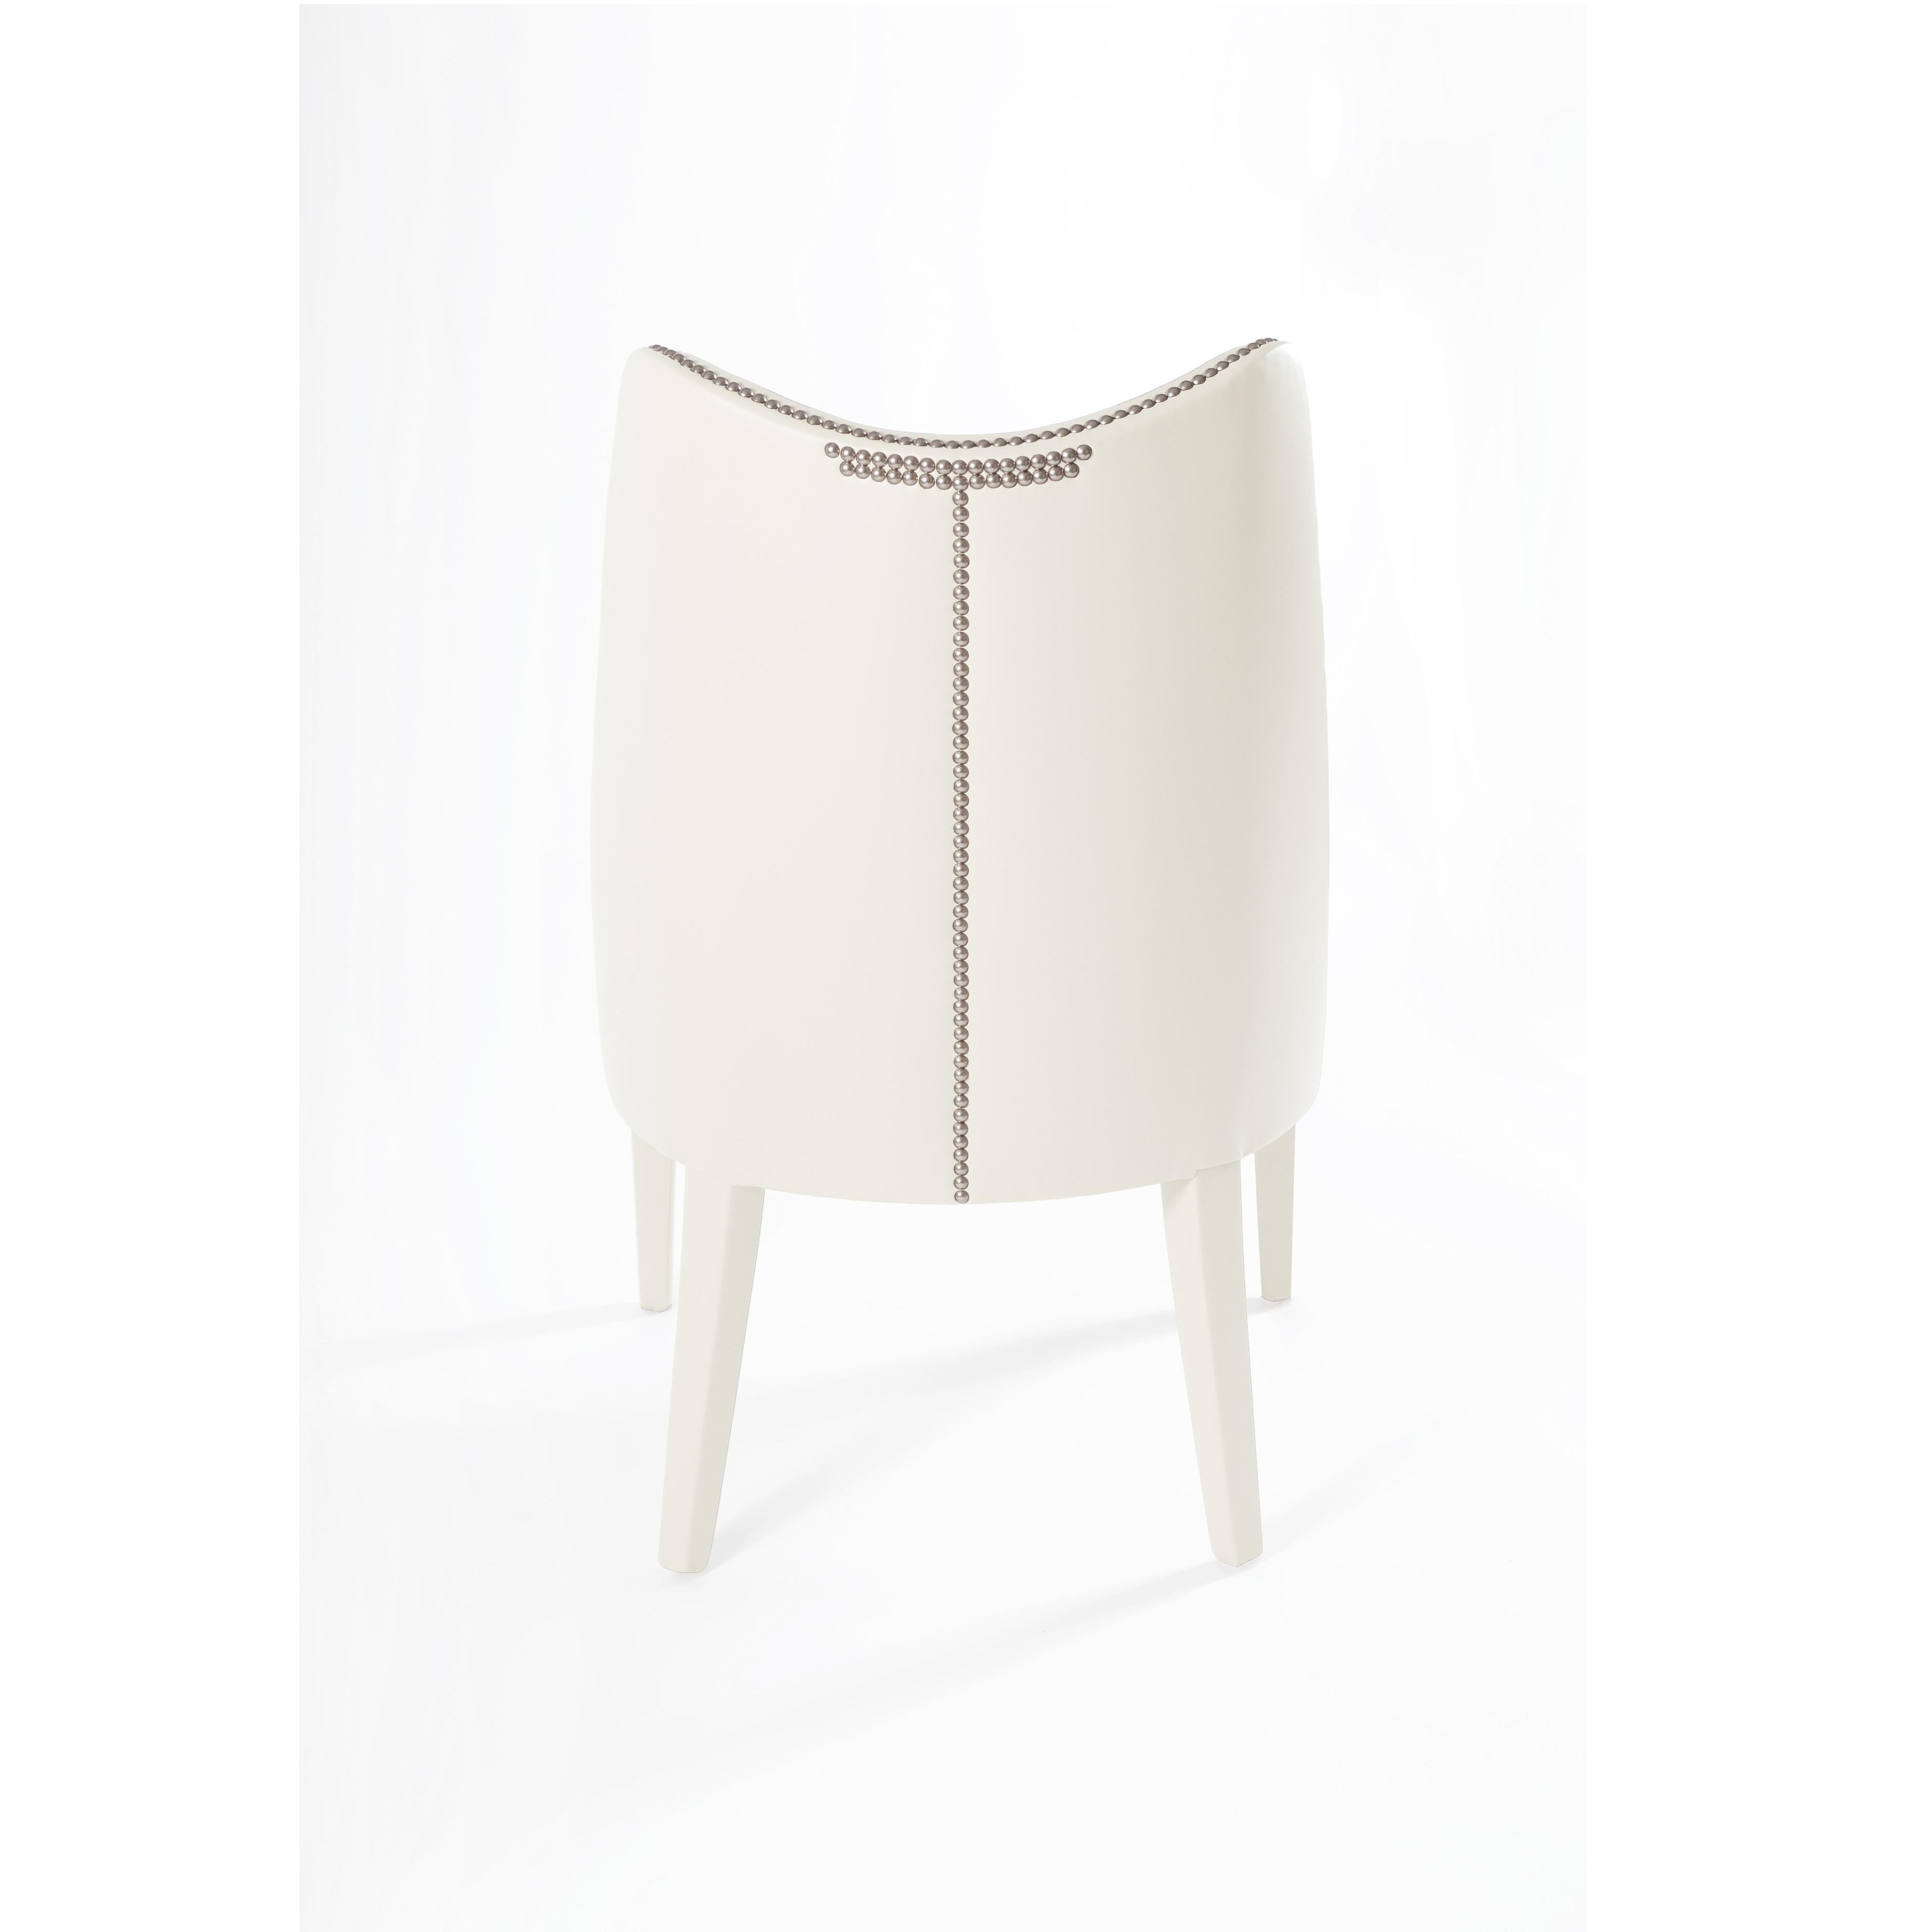 Modern Classic Dining Chairs with Nail Trim Detailing By Munna Design For Sale 1